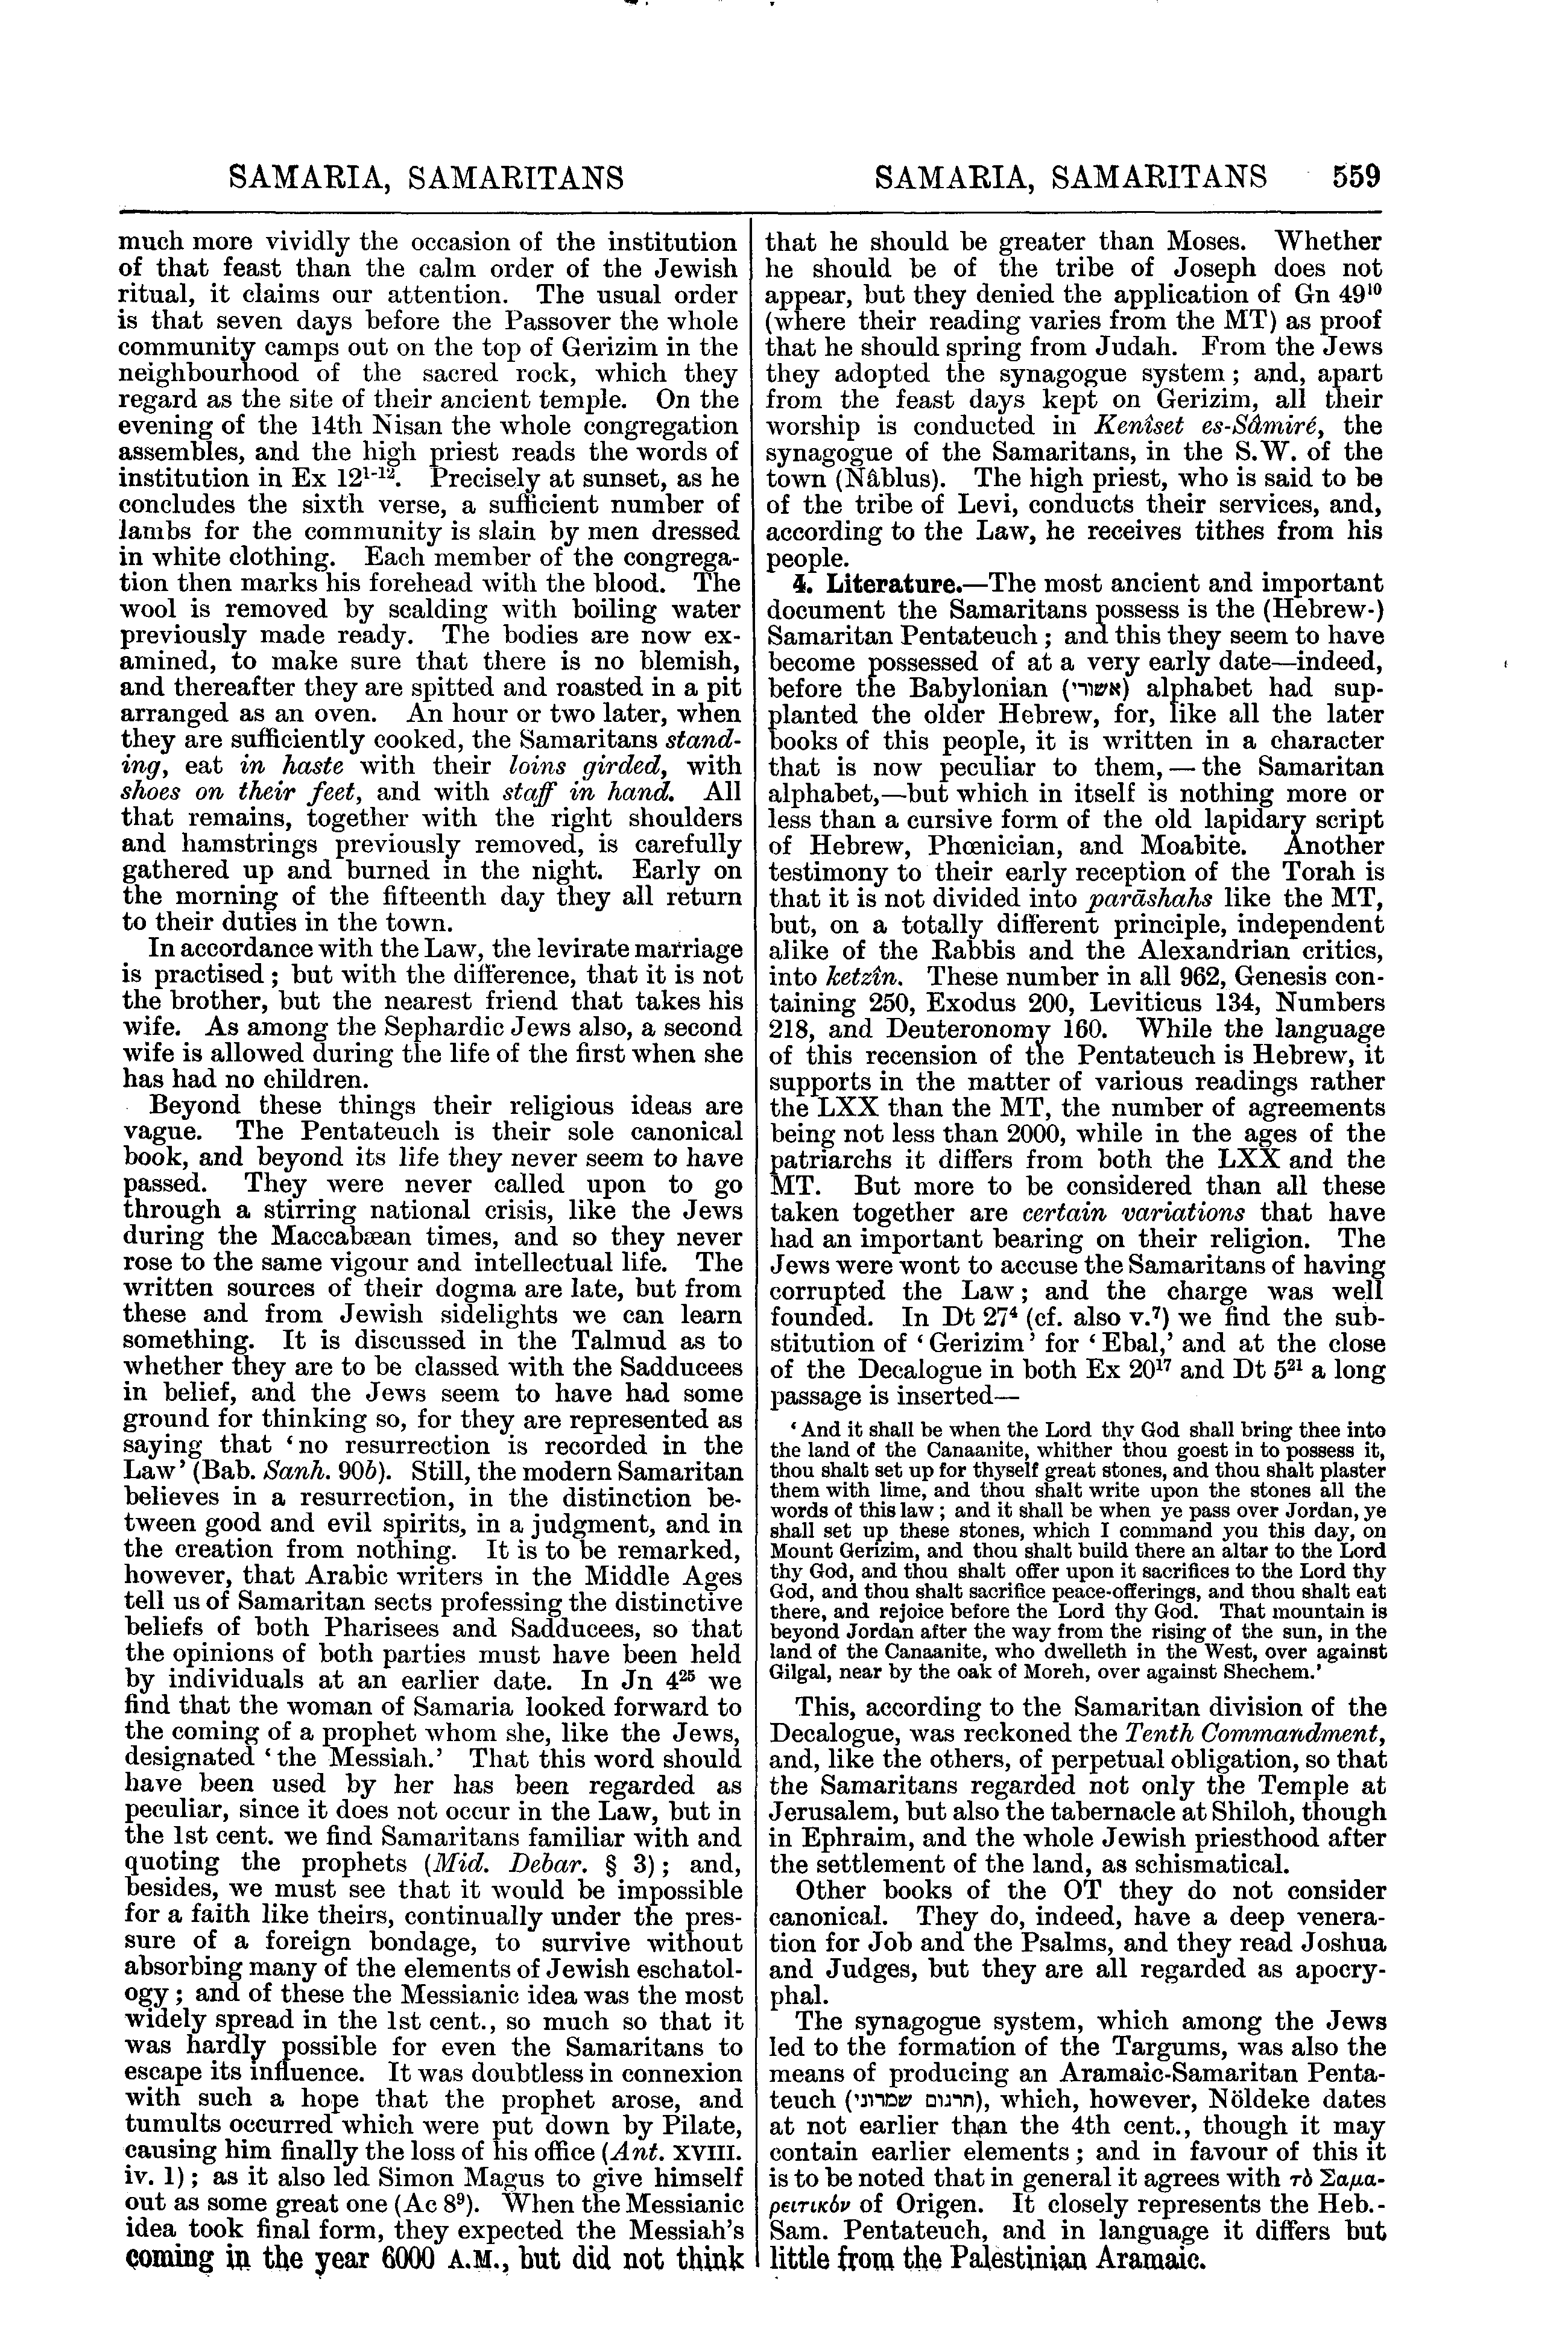 Image of page 559